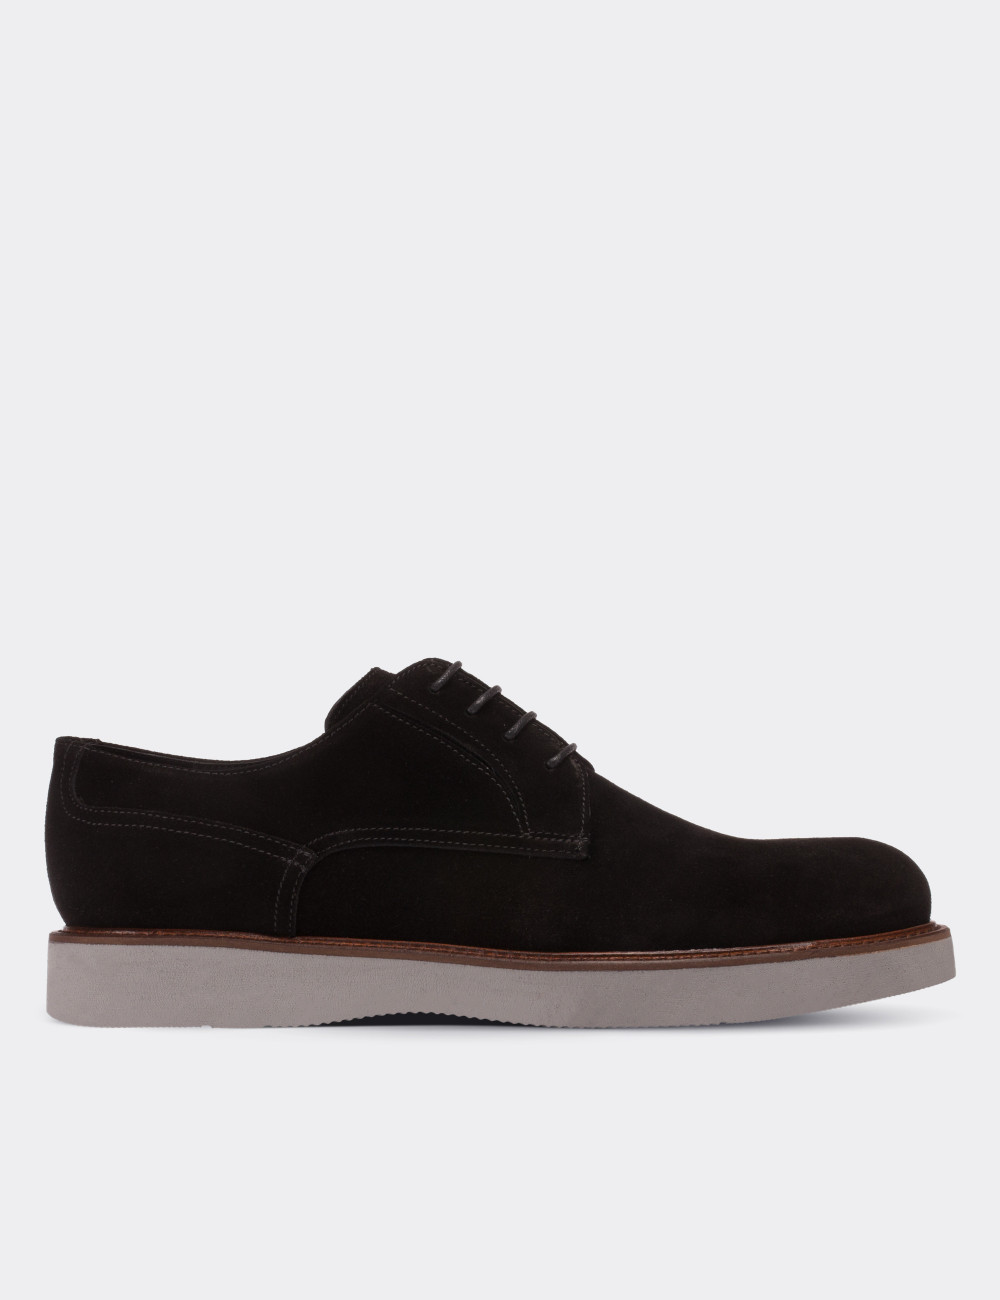 Black Suede Leather Lace-up Shoes - 01294MSYHE19